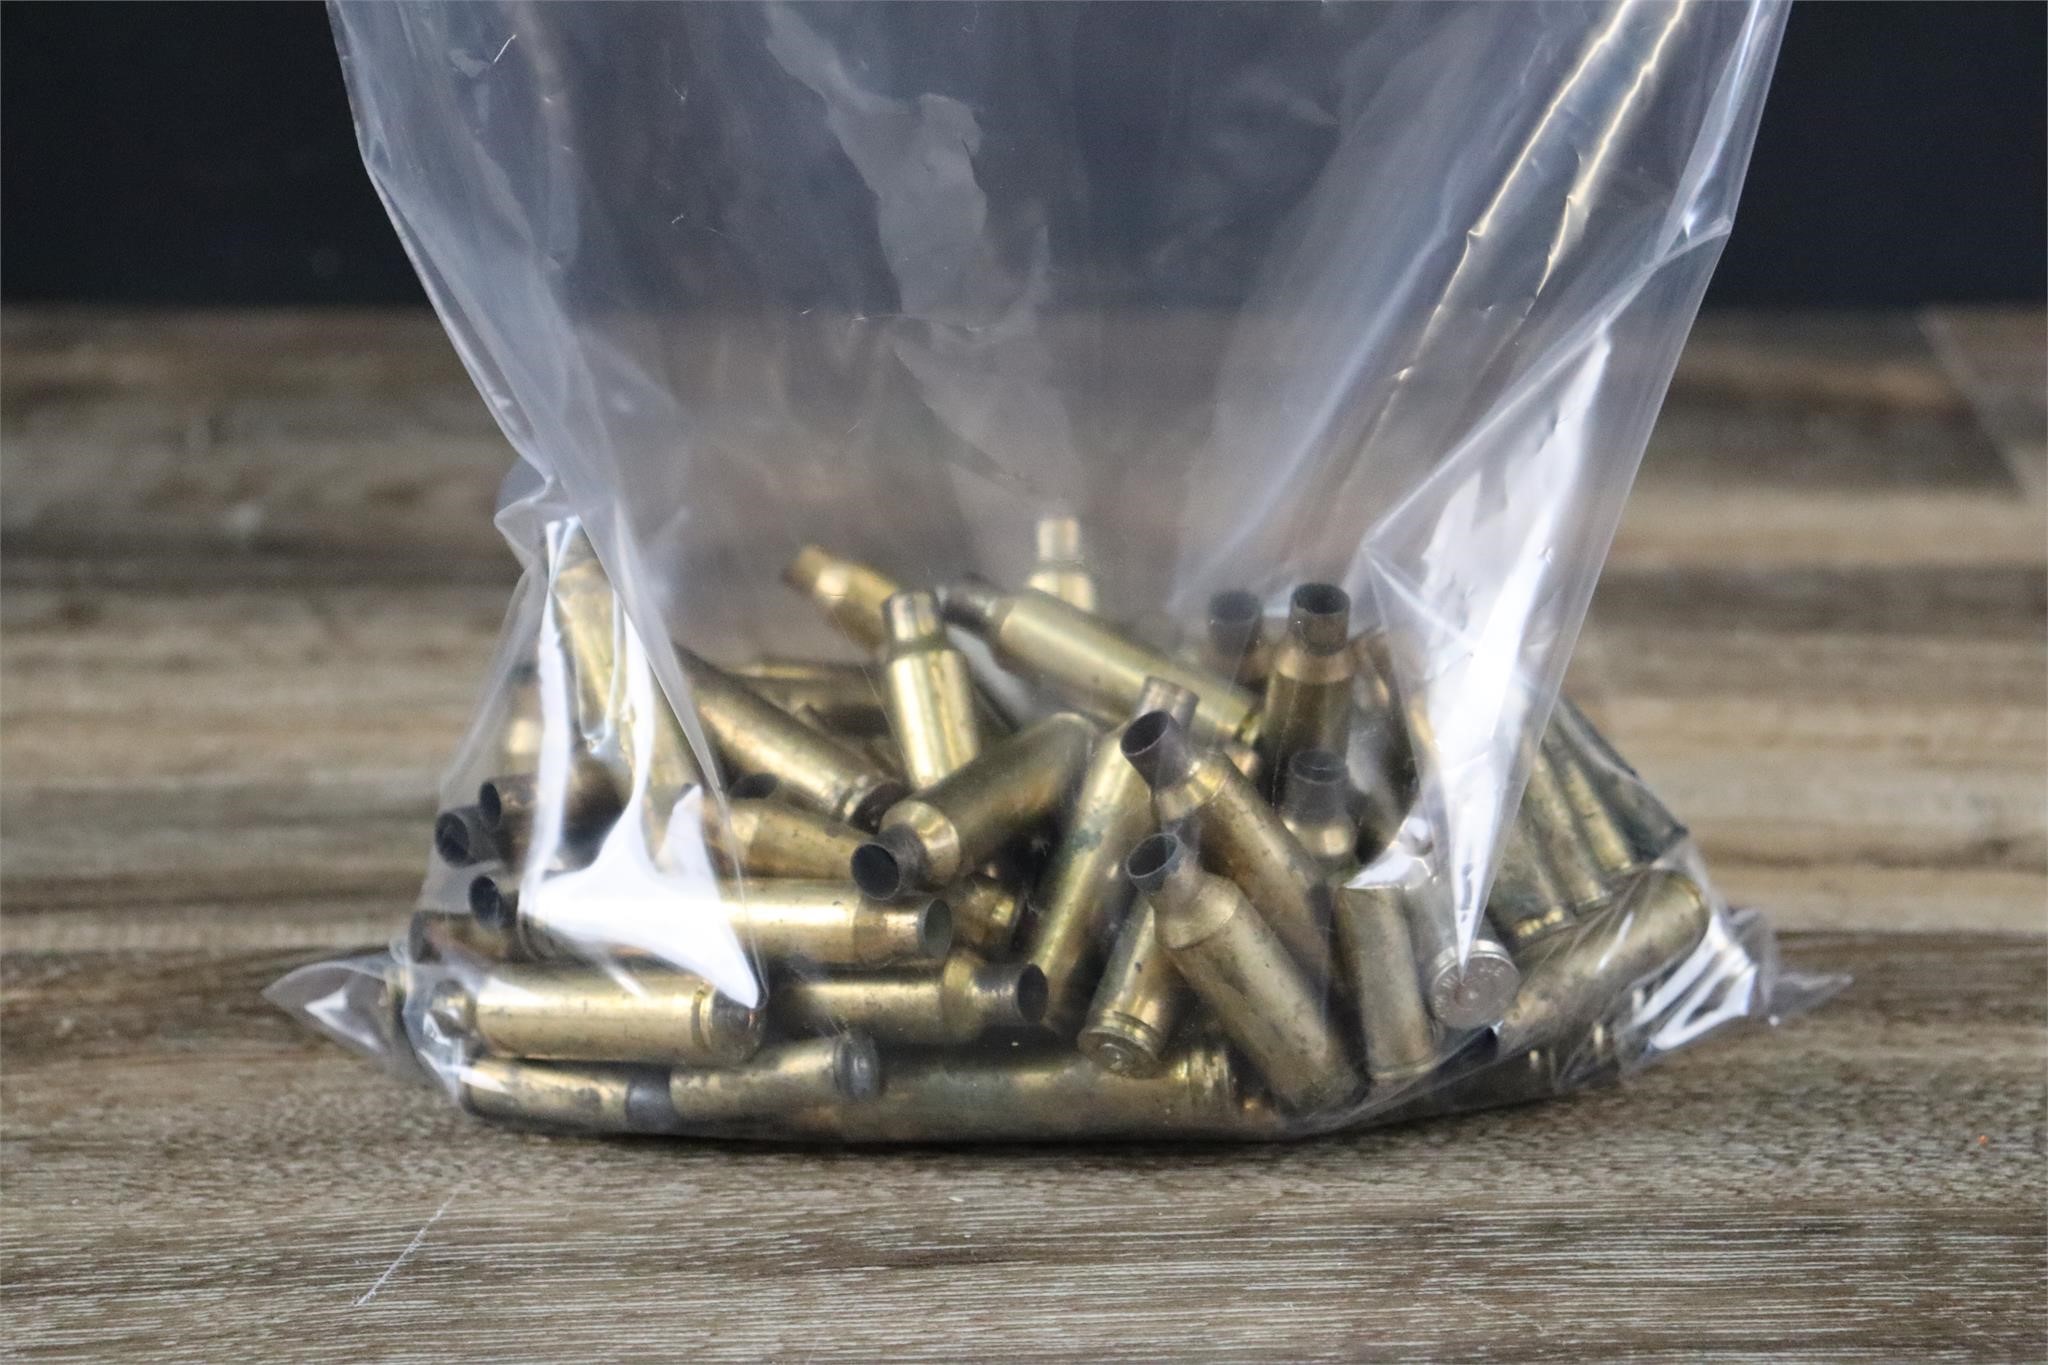 Mixed Bag of Brass - 300 WSM, 300 Win Mag, 7mm-08